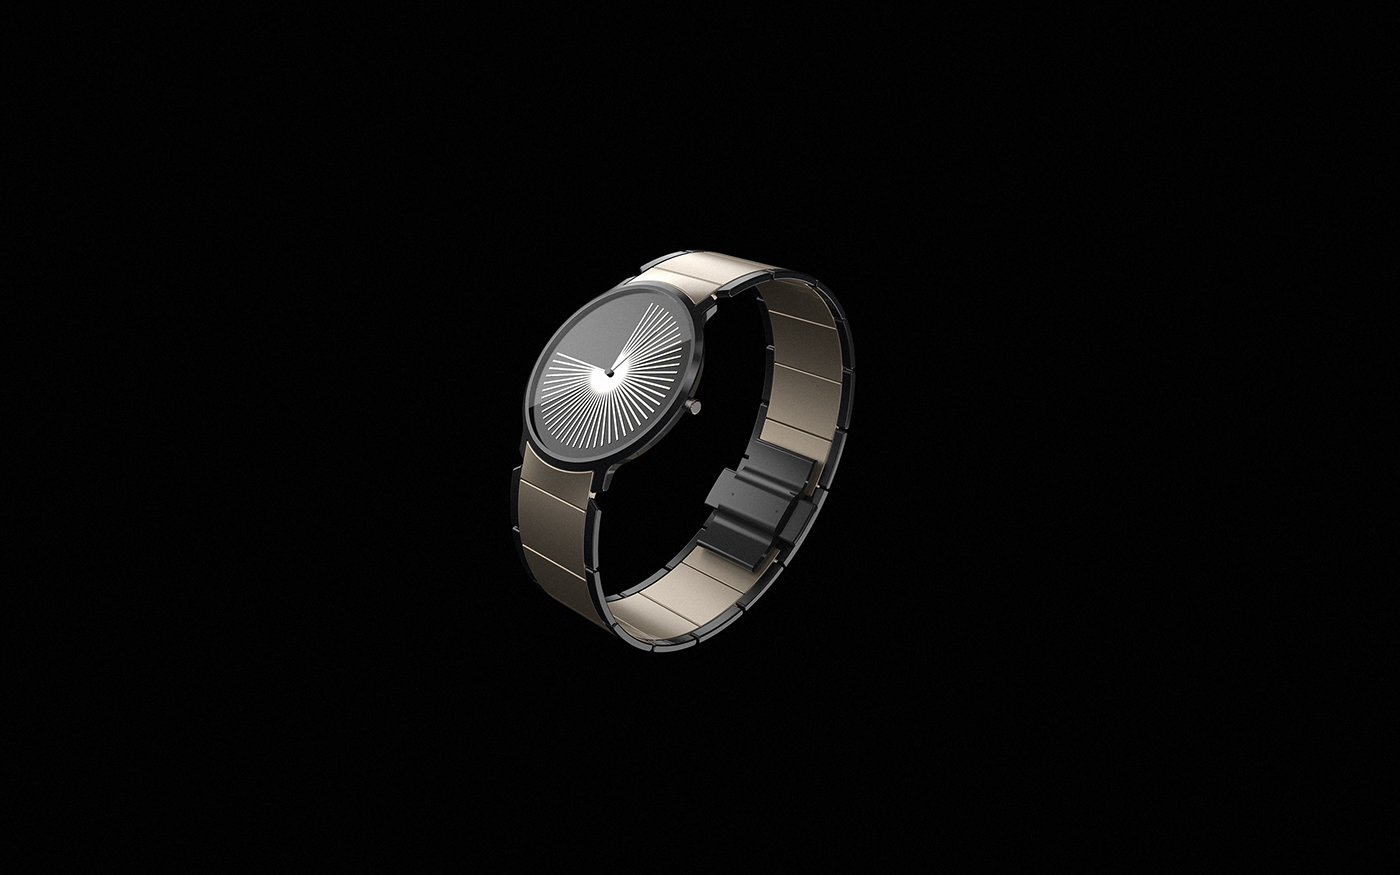 watch the time time reflexion Concept Watch product design ux user experience baptiste maingon design concept smartwatch minimalist design